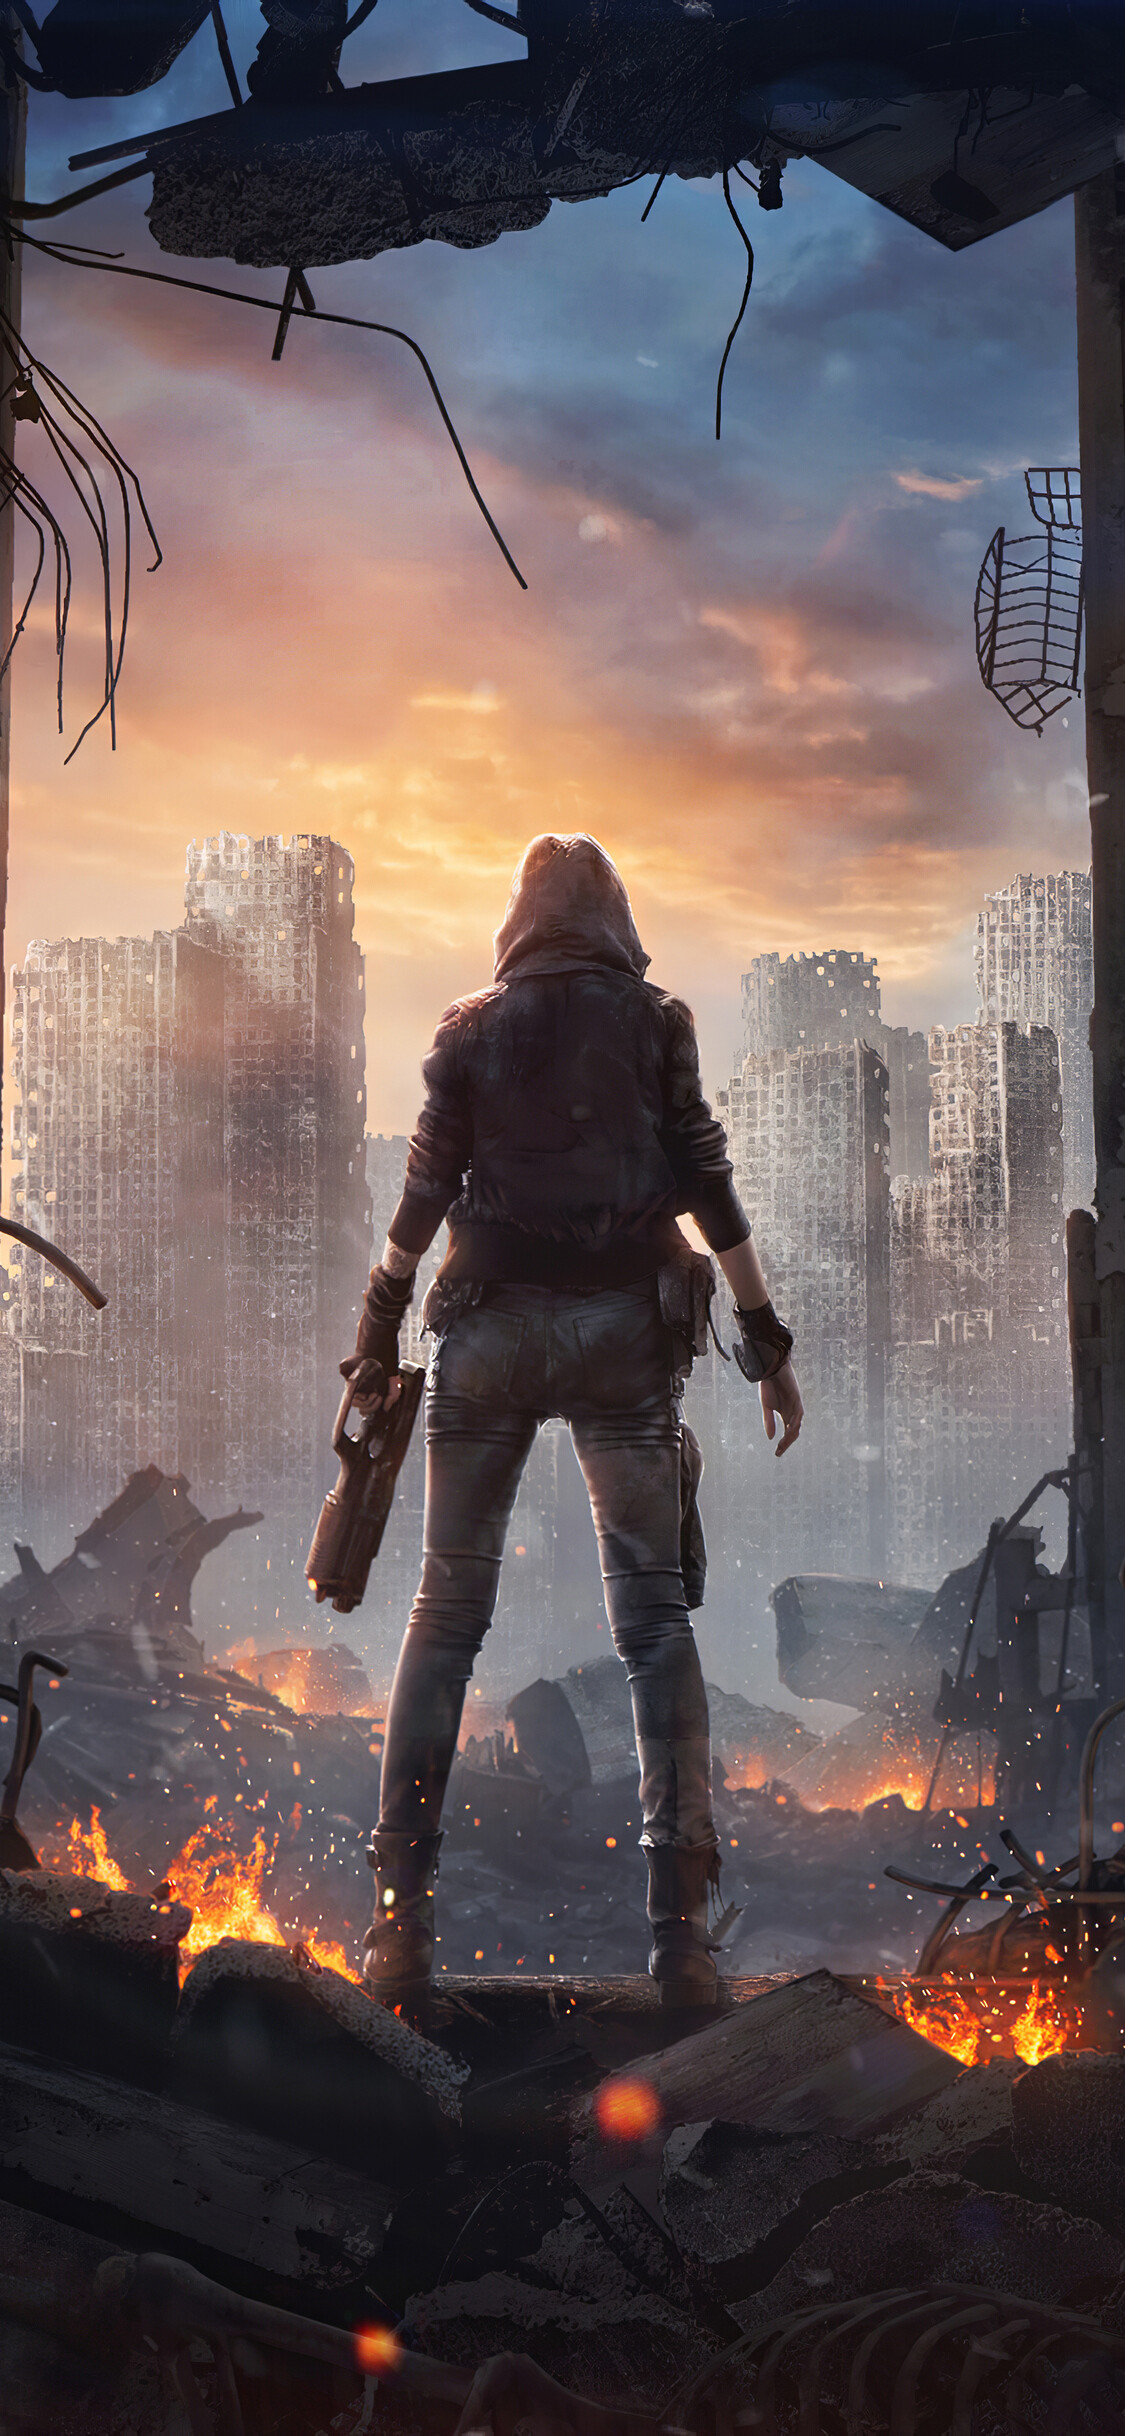 Post-apocalypse: Devastated city, Damage on a catastrophic scale. 1130x2440 HD Wallpaper.